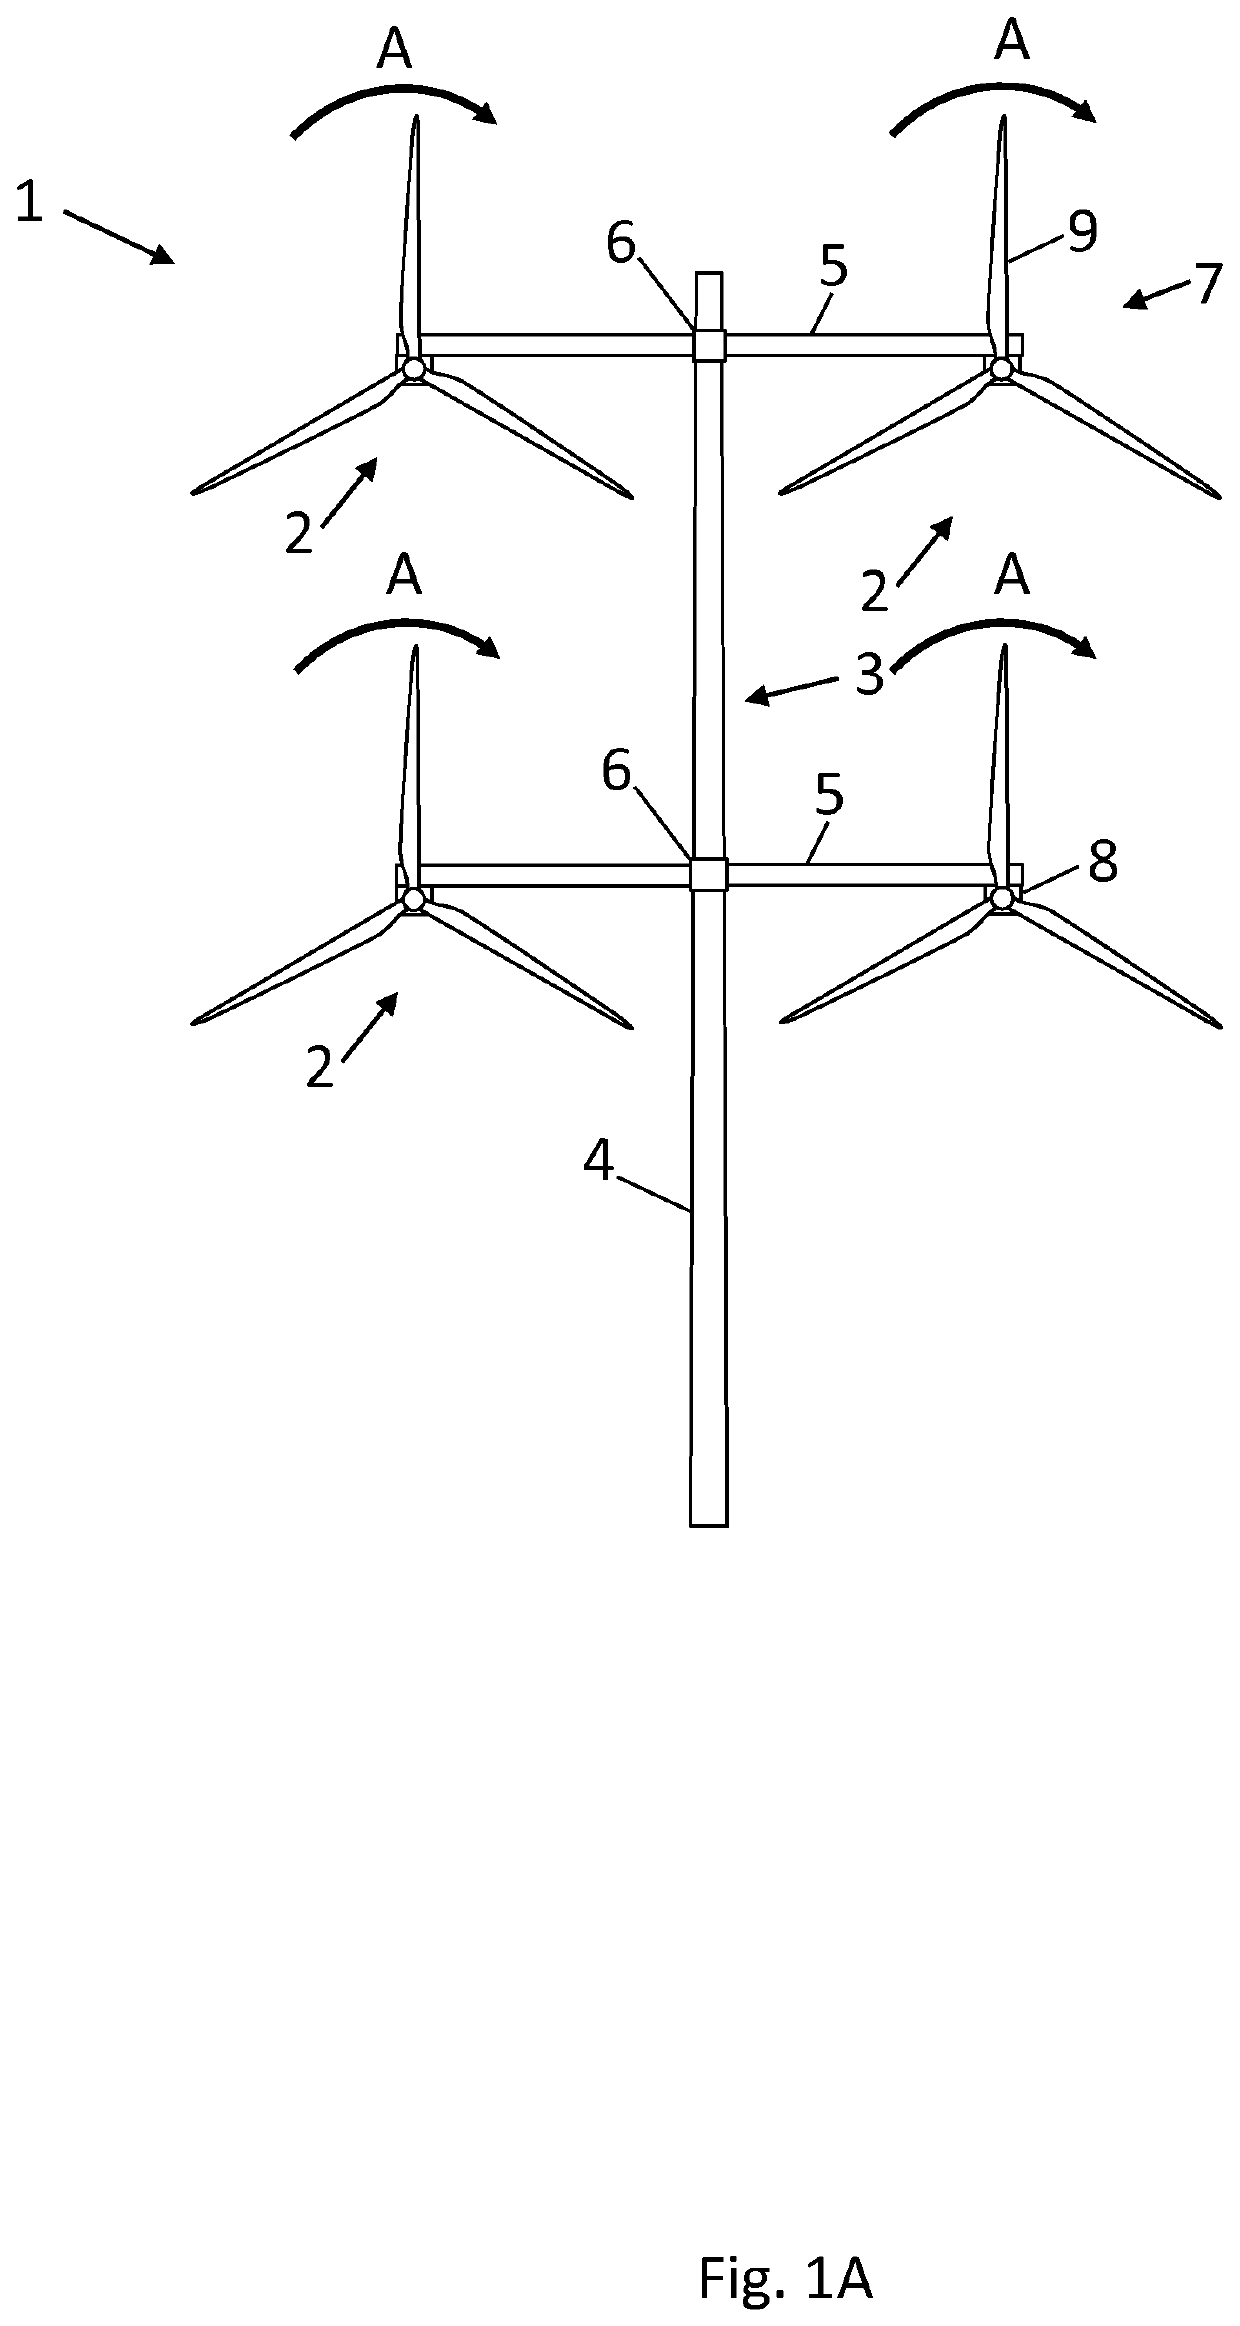 Wind turbine system with damping during service